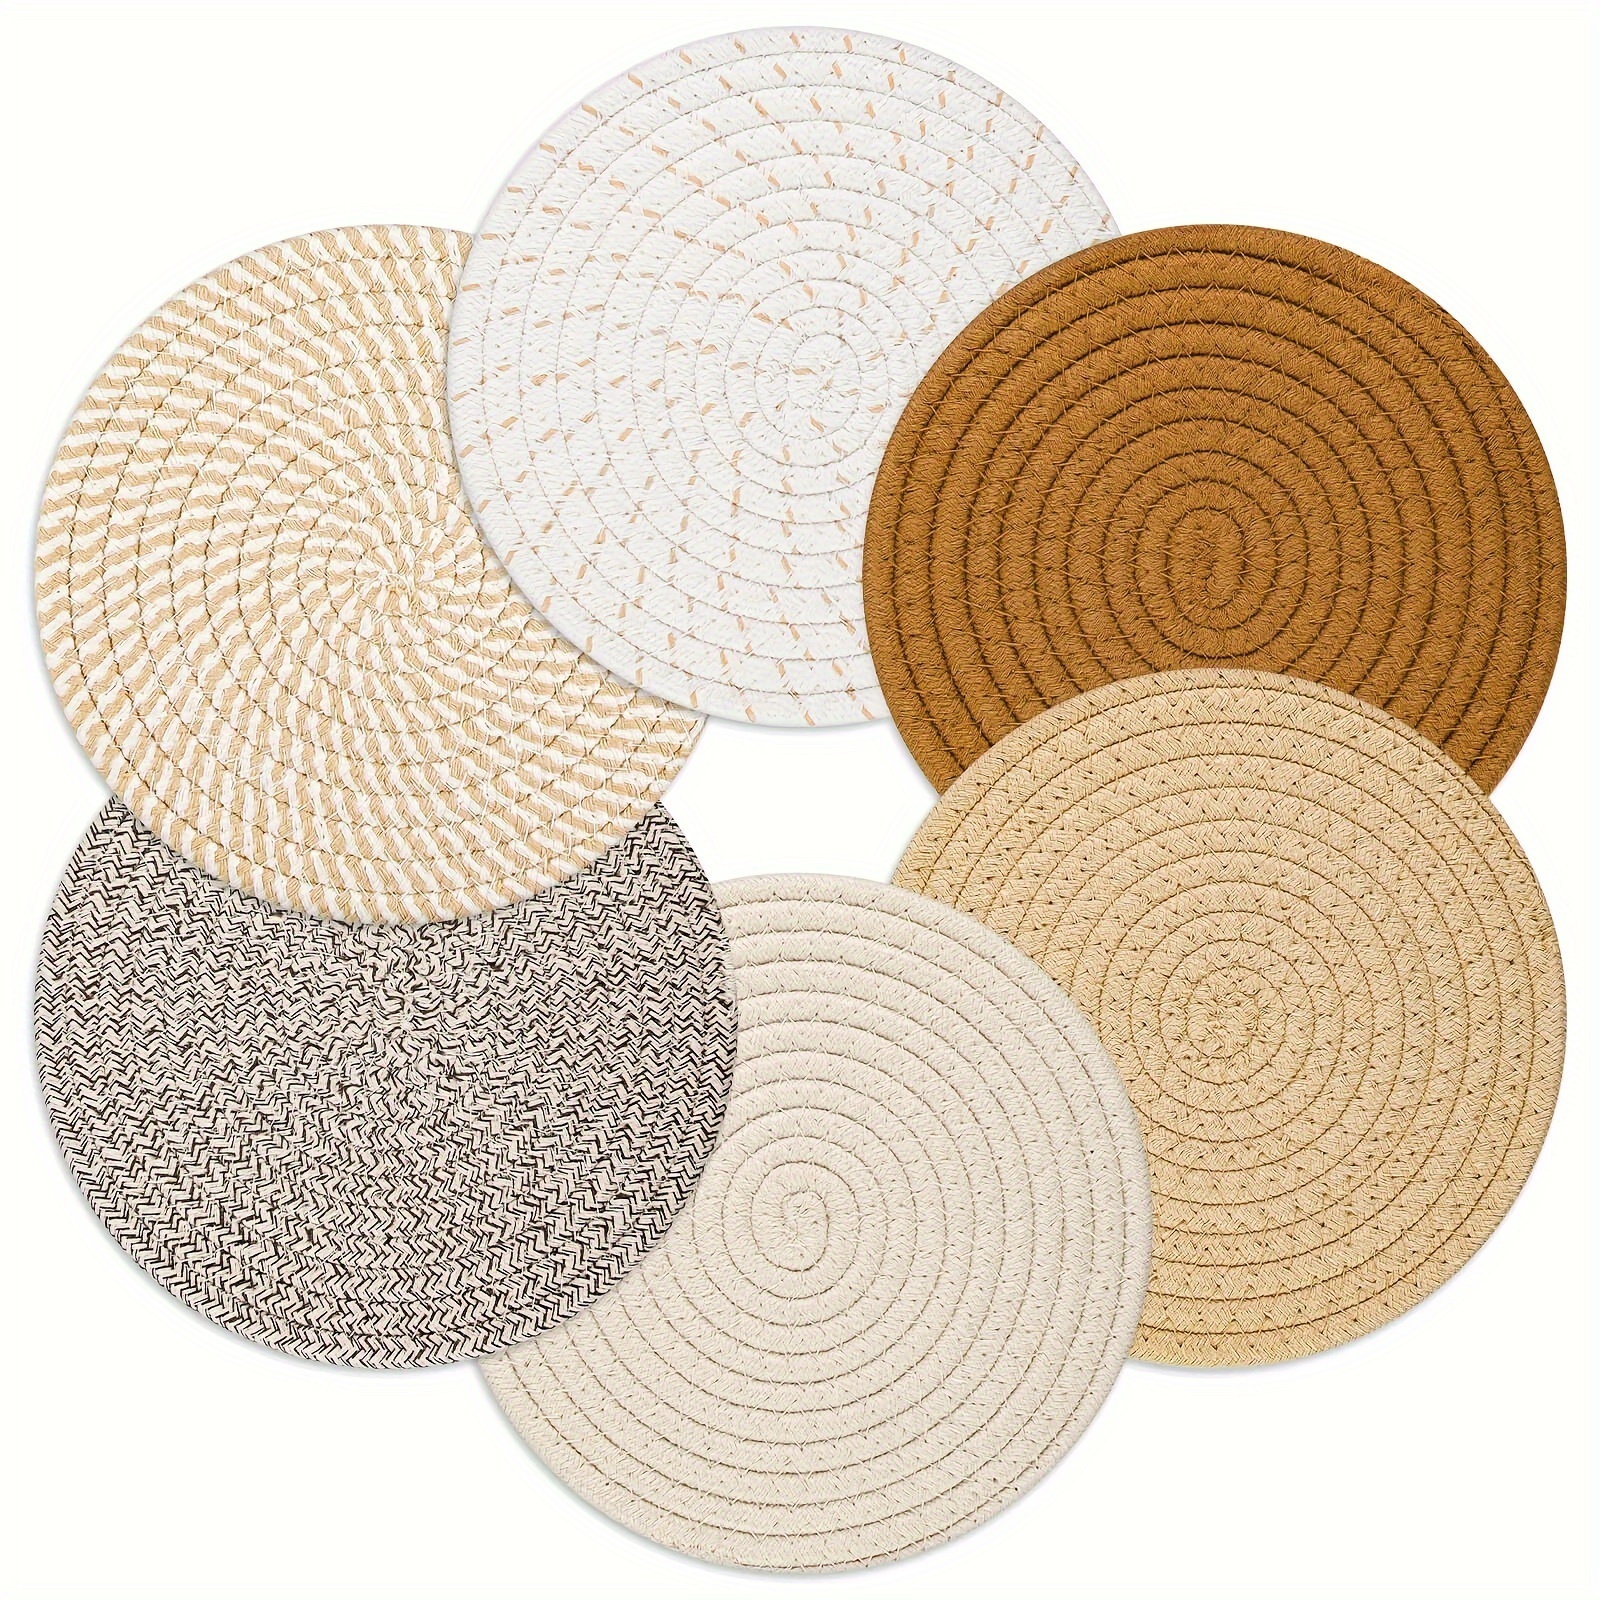 

6pcs Trivets For Hot Pots And Pans, Heat Resistant Hot Pads, Pot Holders For Kitchen, Hot Plate Mats For Table, Kitchen Decor For Counter, Home Essentials, Farmhouse